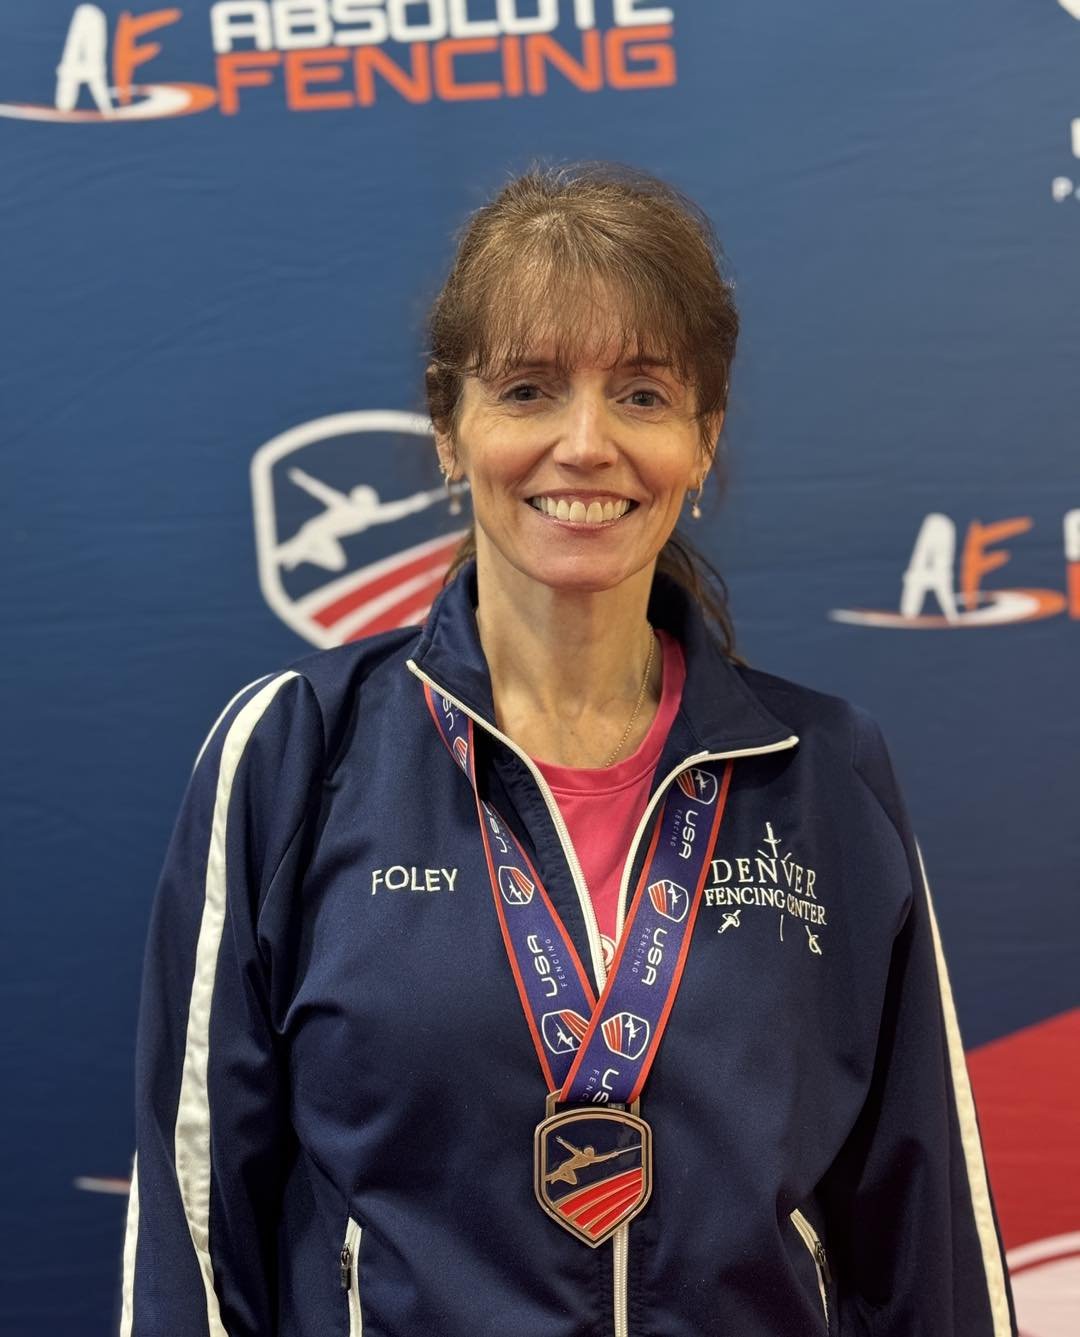 Eileen Foley finished 7th place to win her 2nd National medal of the season.  Congratulations Eileen! 

#denverfencing #denverfencingcenter #denvercolorado #usafencing #denver #fencing #sabre #womensabre